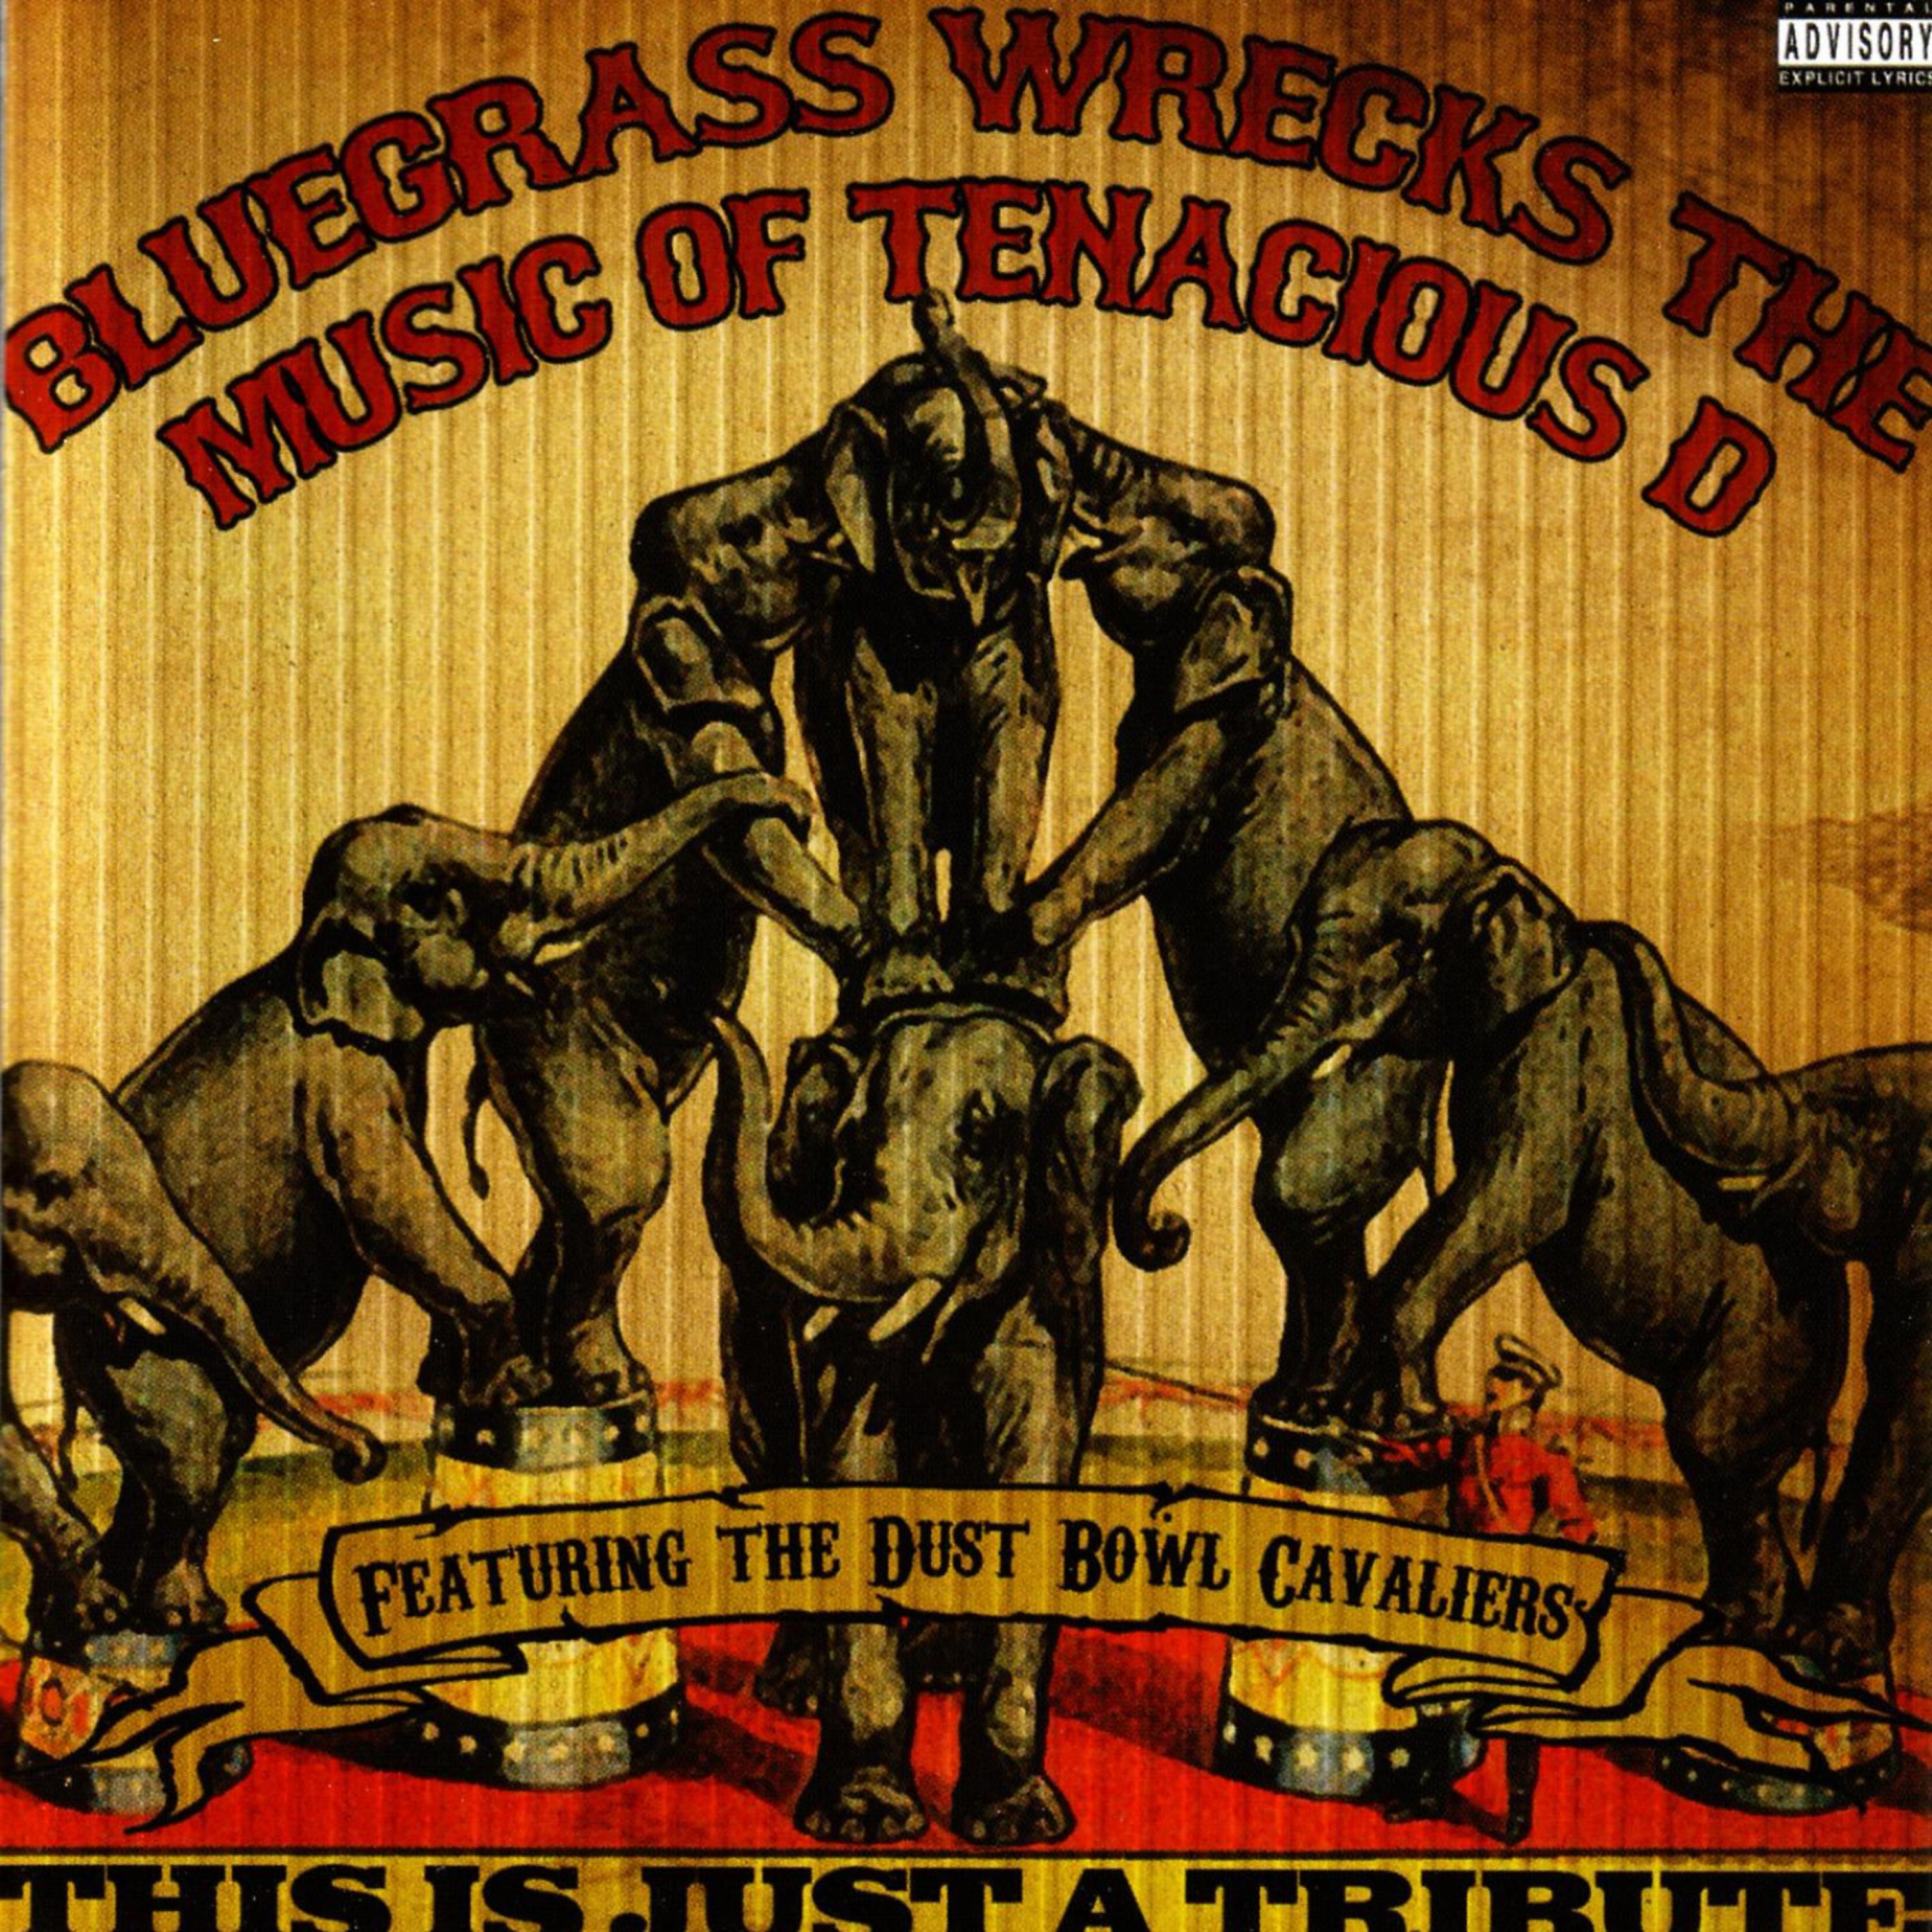 Постер альбома This Is Just A Tribute: Bluegrass Wrecks The Music Of Tenacious D Ft The Dust Bowl Cavaliers